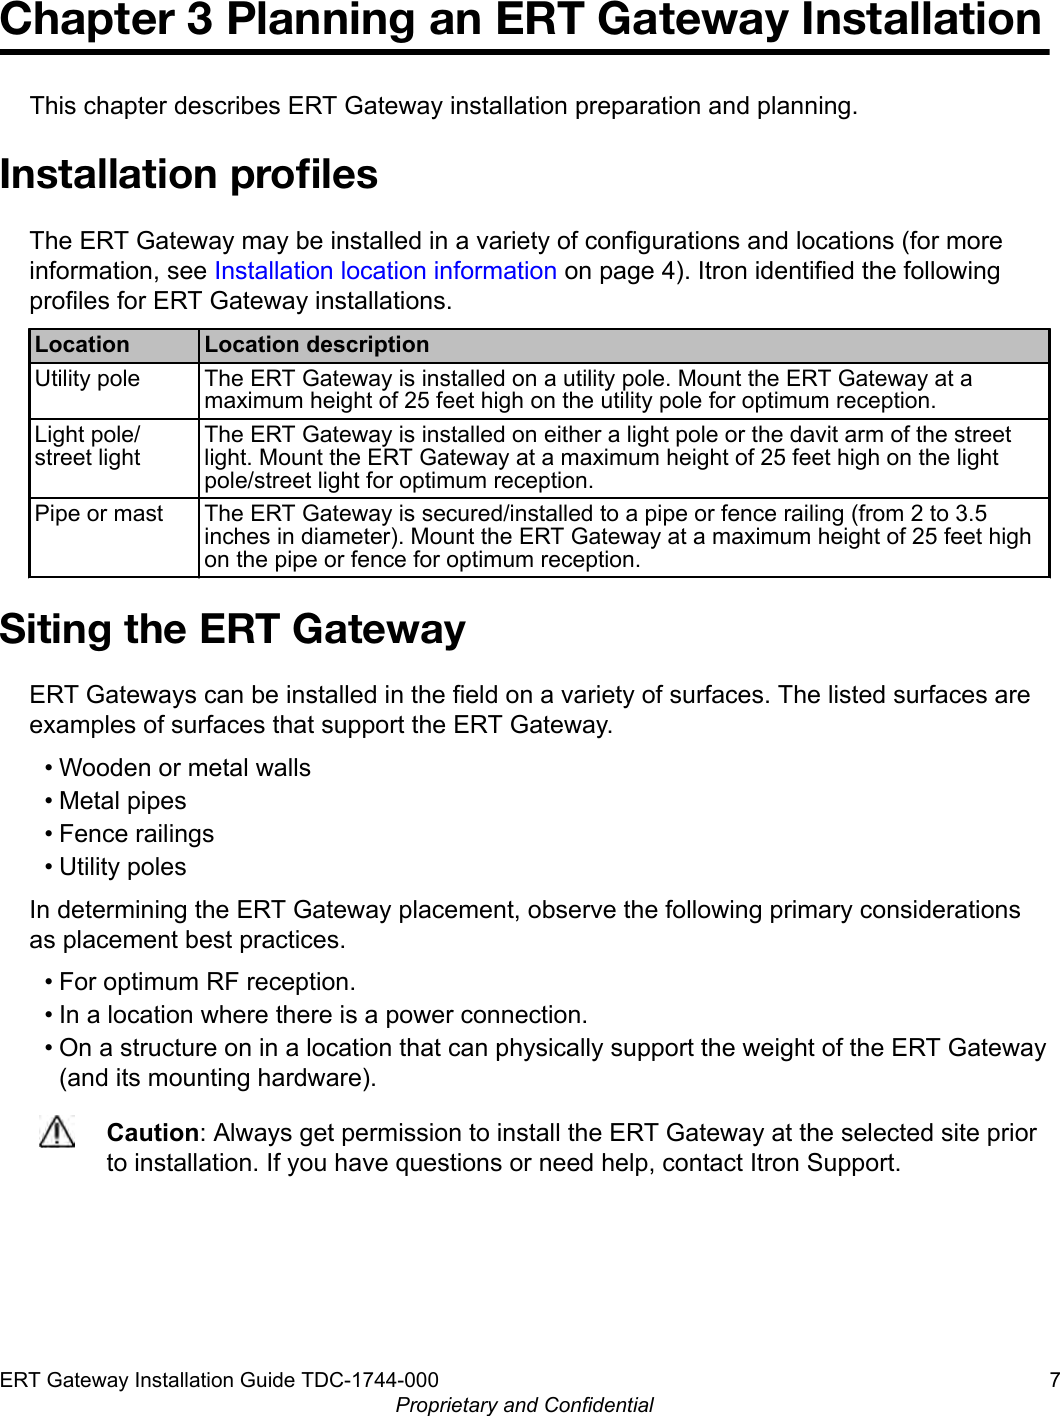 Chapter 3 Planning an ERT Gateway InstallationThis chapter describes ERT Gateway installation preparation and planning.Installation proﬁlesThe ERT Gateway may be installed in a variety of configurations and locations (for moreinformation, see Installation location information on page 4). Itron identified the followingprofiles for ERT Gateway installations.Location Location descriptionUtility pole The ERT Gateway is installed on a utility pole. Mount the ERT Gateway at amaximum height of 25 feet high on the utility pole for optimum reception.Light pole/street lightThe ERT Gateway is installed on either a light pole or the davit arm of the streetlight. Mount the ERT Gateway at a maximum height of 25 feet high on the lightpole/street light for optimum reception.Pipe or mast The ERT Gateway is secured/installed to a pipe or fence railing (from 2 to 3.5inches in diameter). Mount the ERT Gateway at a maximum height of 25 feet highon the pipe or fence for optimum reception.Siting the ERT GatewayERT Gateways can be installed in the field on a variety of surfaces. The listed surfaces areexamples of surfaces that support the ERT Gateway.• Wooden or metal walls• Metal pipes• Fence railings• Utility polesIn determining the ERT Gateway placement, observe the following primary considerationsas placement best practices.• For optimum RF reception.• In a location where there is a power connection.• On a structure on in a location that can physically support the weight of the ERT Gateway(and its mounting hardware).Caution: Always get permission to install the ERT Gateway at the selected site priorto installation. If you have questions or need help, contact Itron Support.ERT Gateway Installation Guide TDC-1744-000 7Proprietary and Confidential